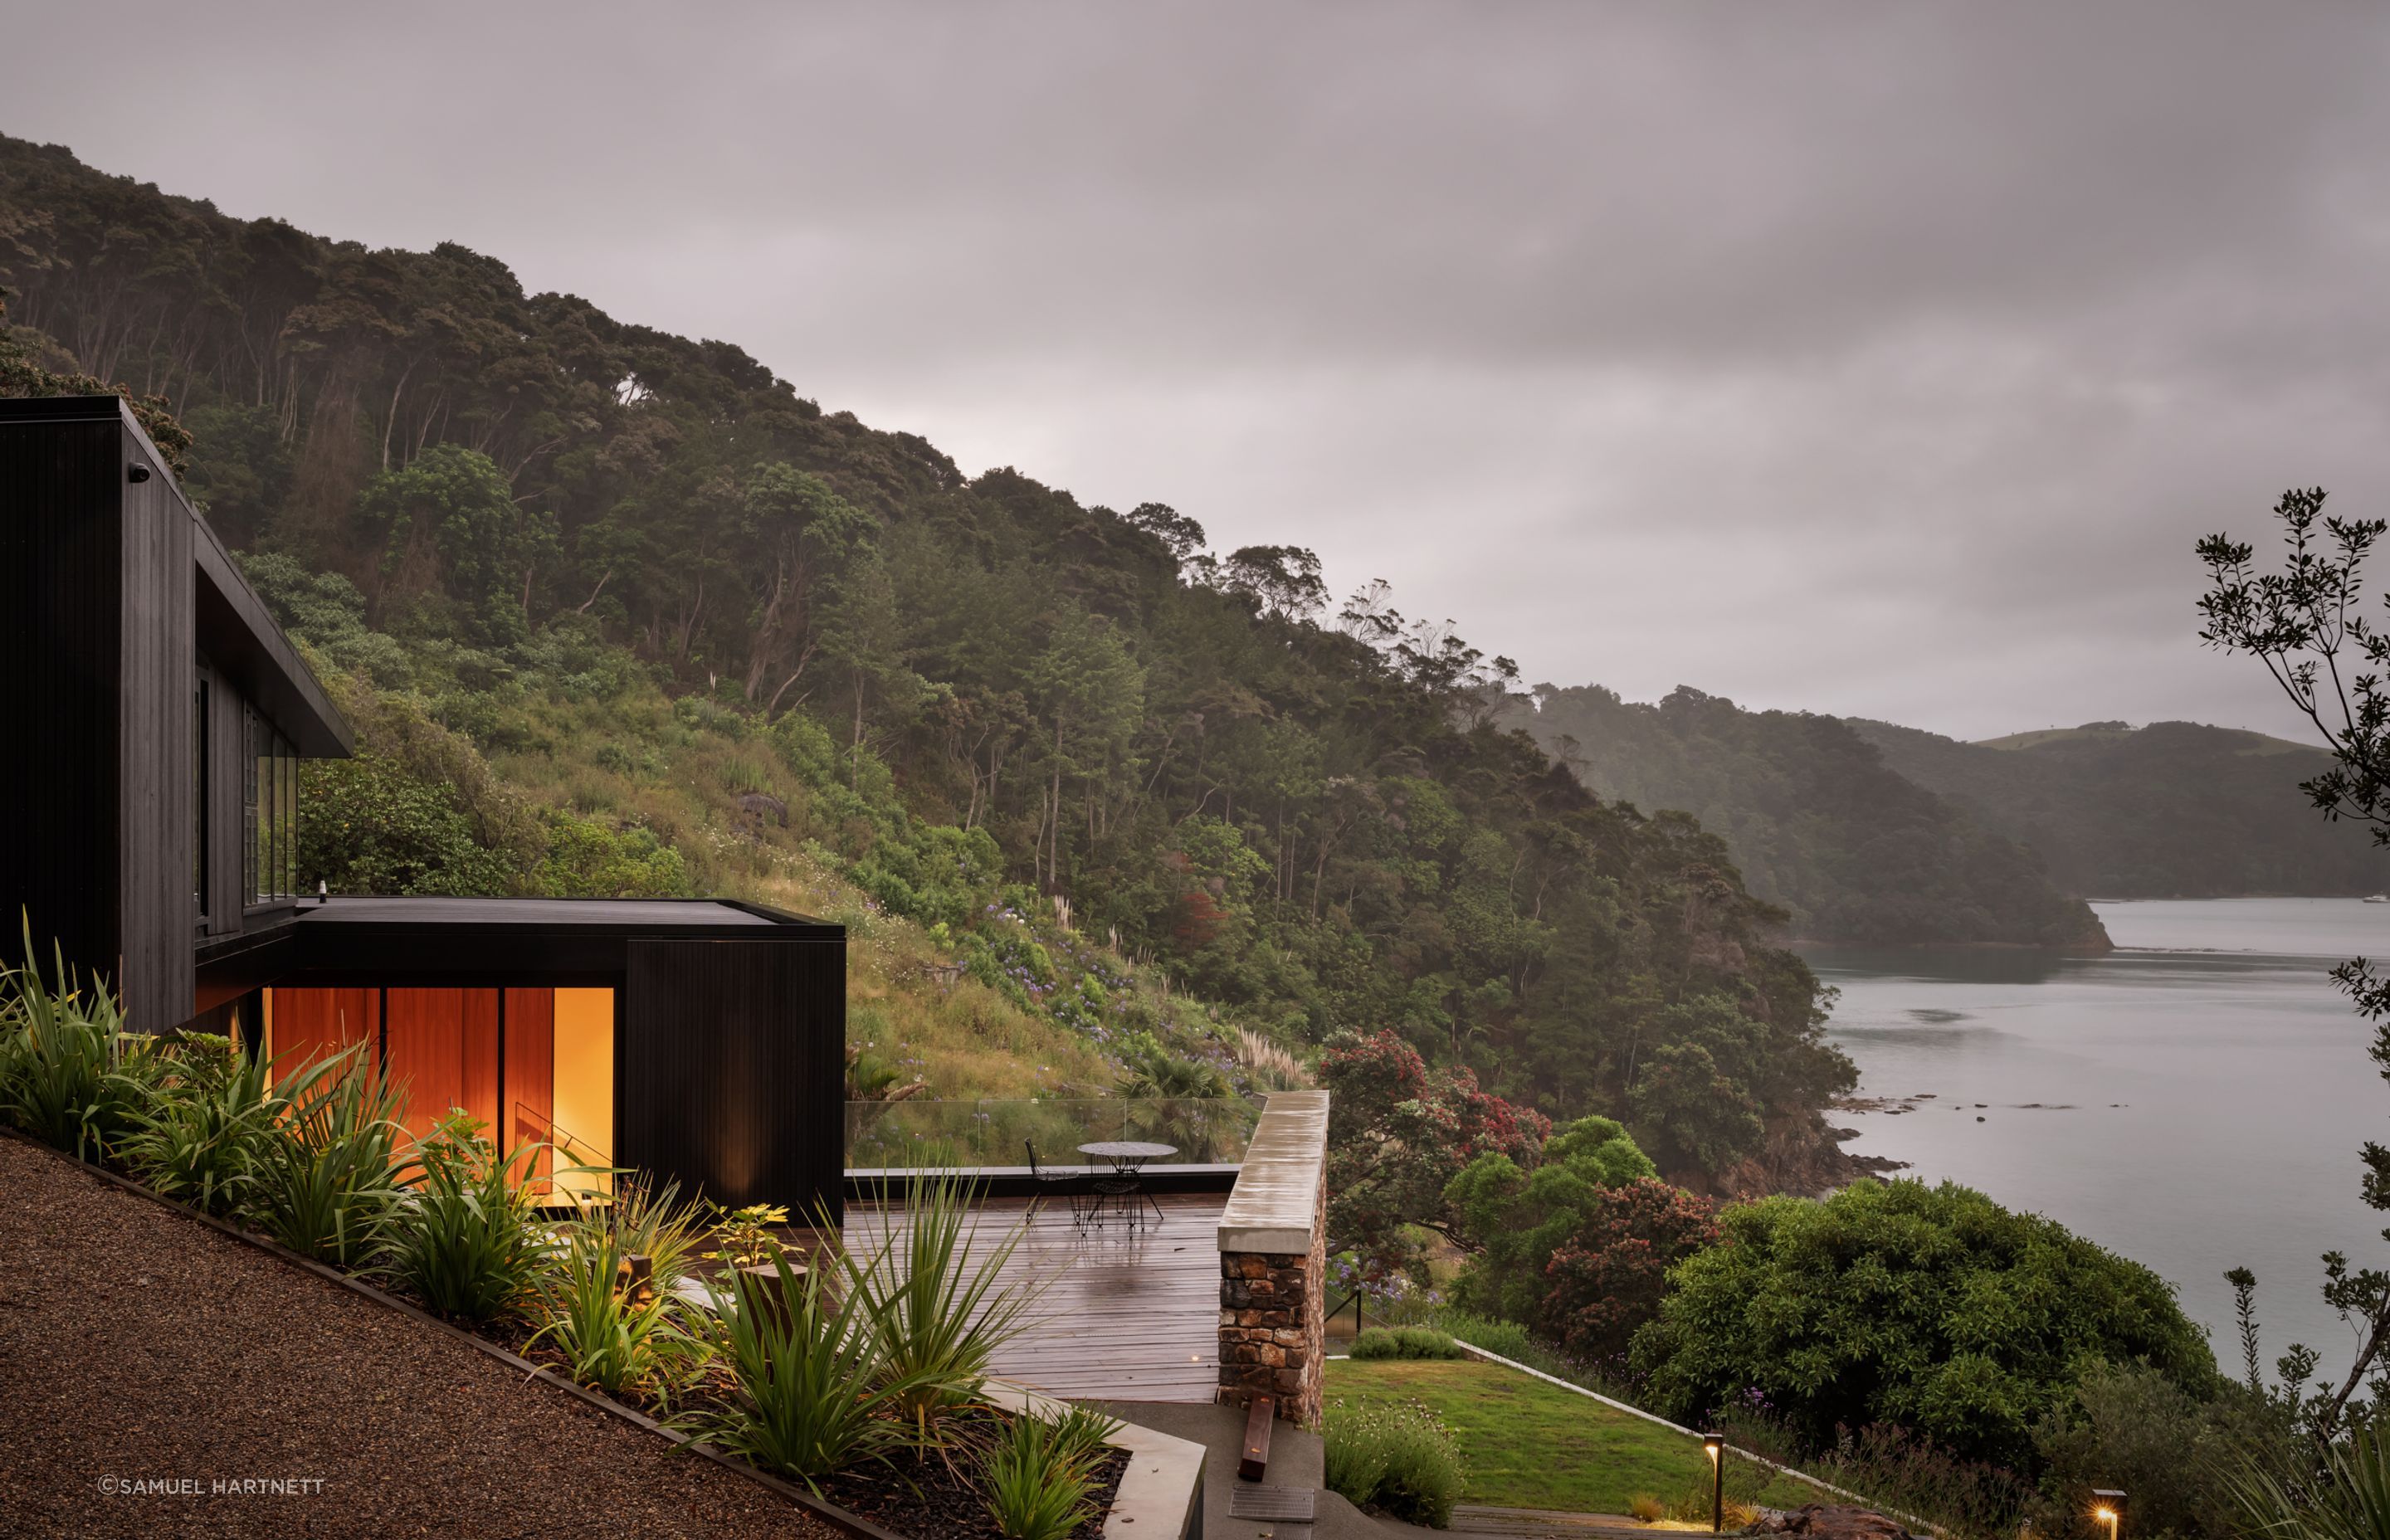 The site is on a remote part of Waiheke Island. “Everything's made in components: you can’t have great big elements, because it can't get down the driveway.”